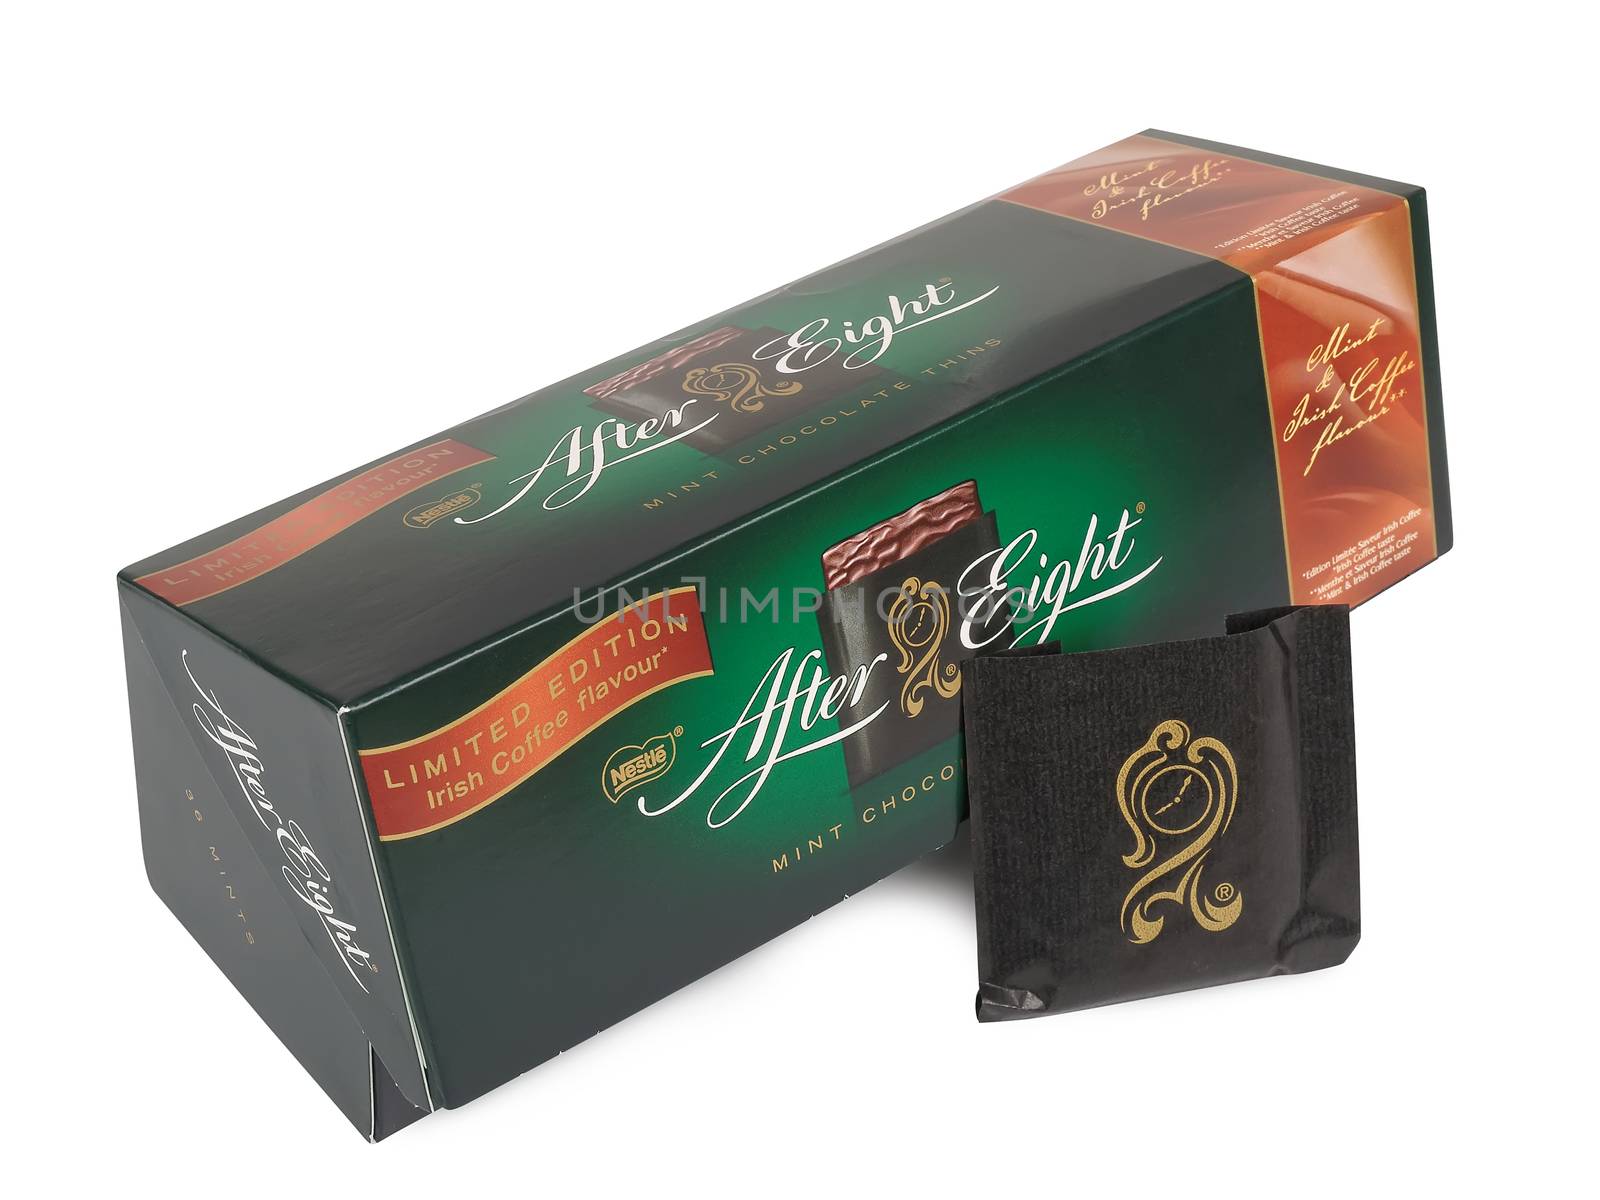 PULA, CROATIA - MARCH 15, 2016: Box of Nestle's After Eight mint chocolate thins on white background. Established in 1962, After Eight is recognized as the leading mint chocolate brand.